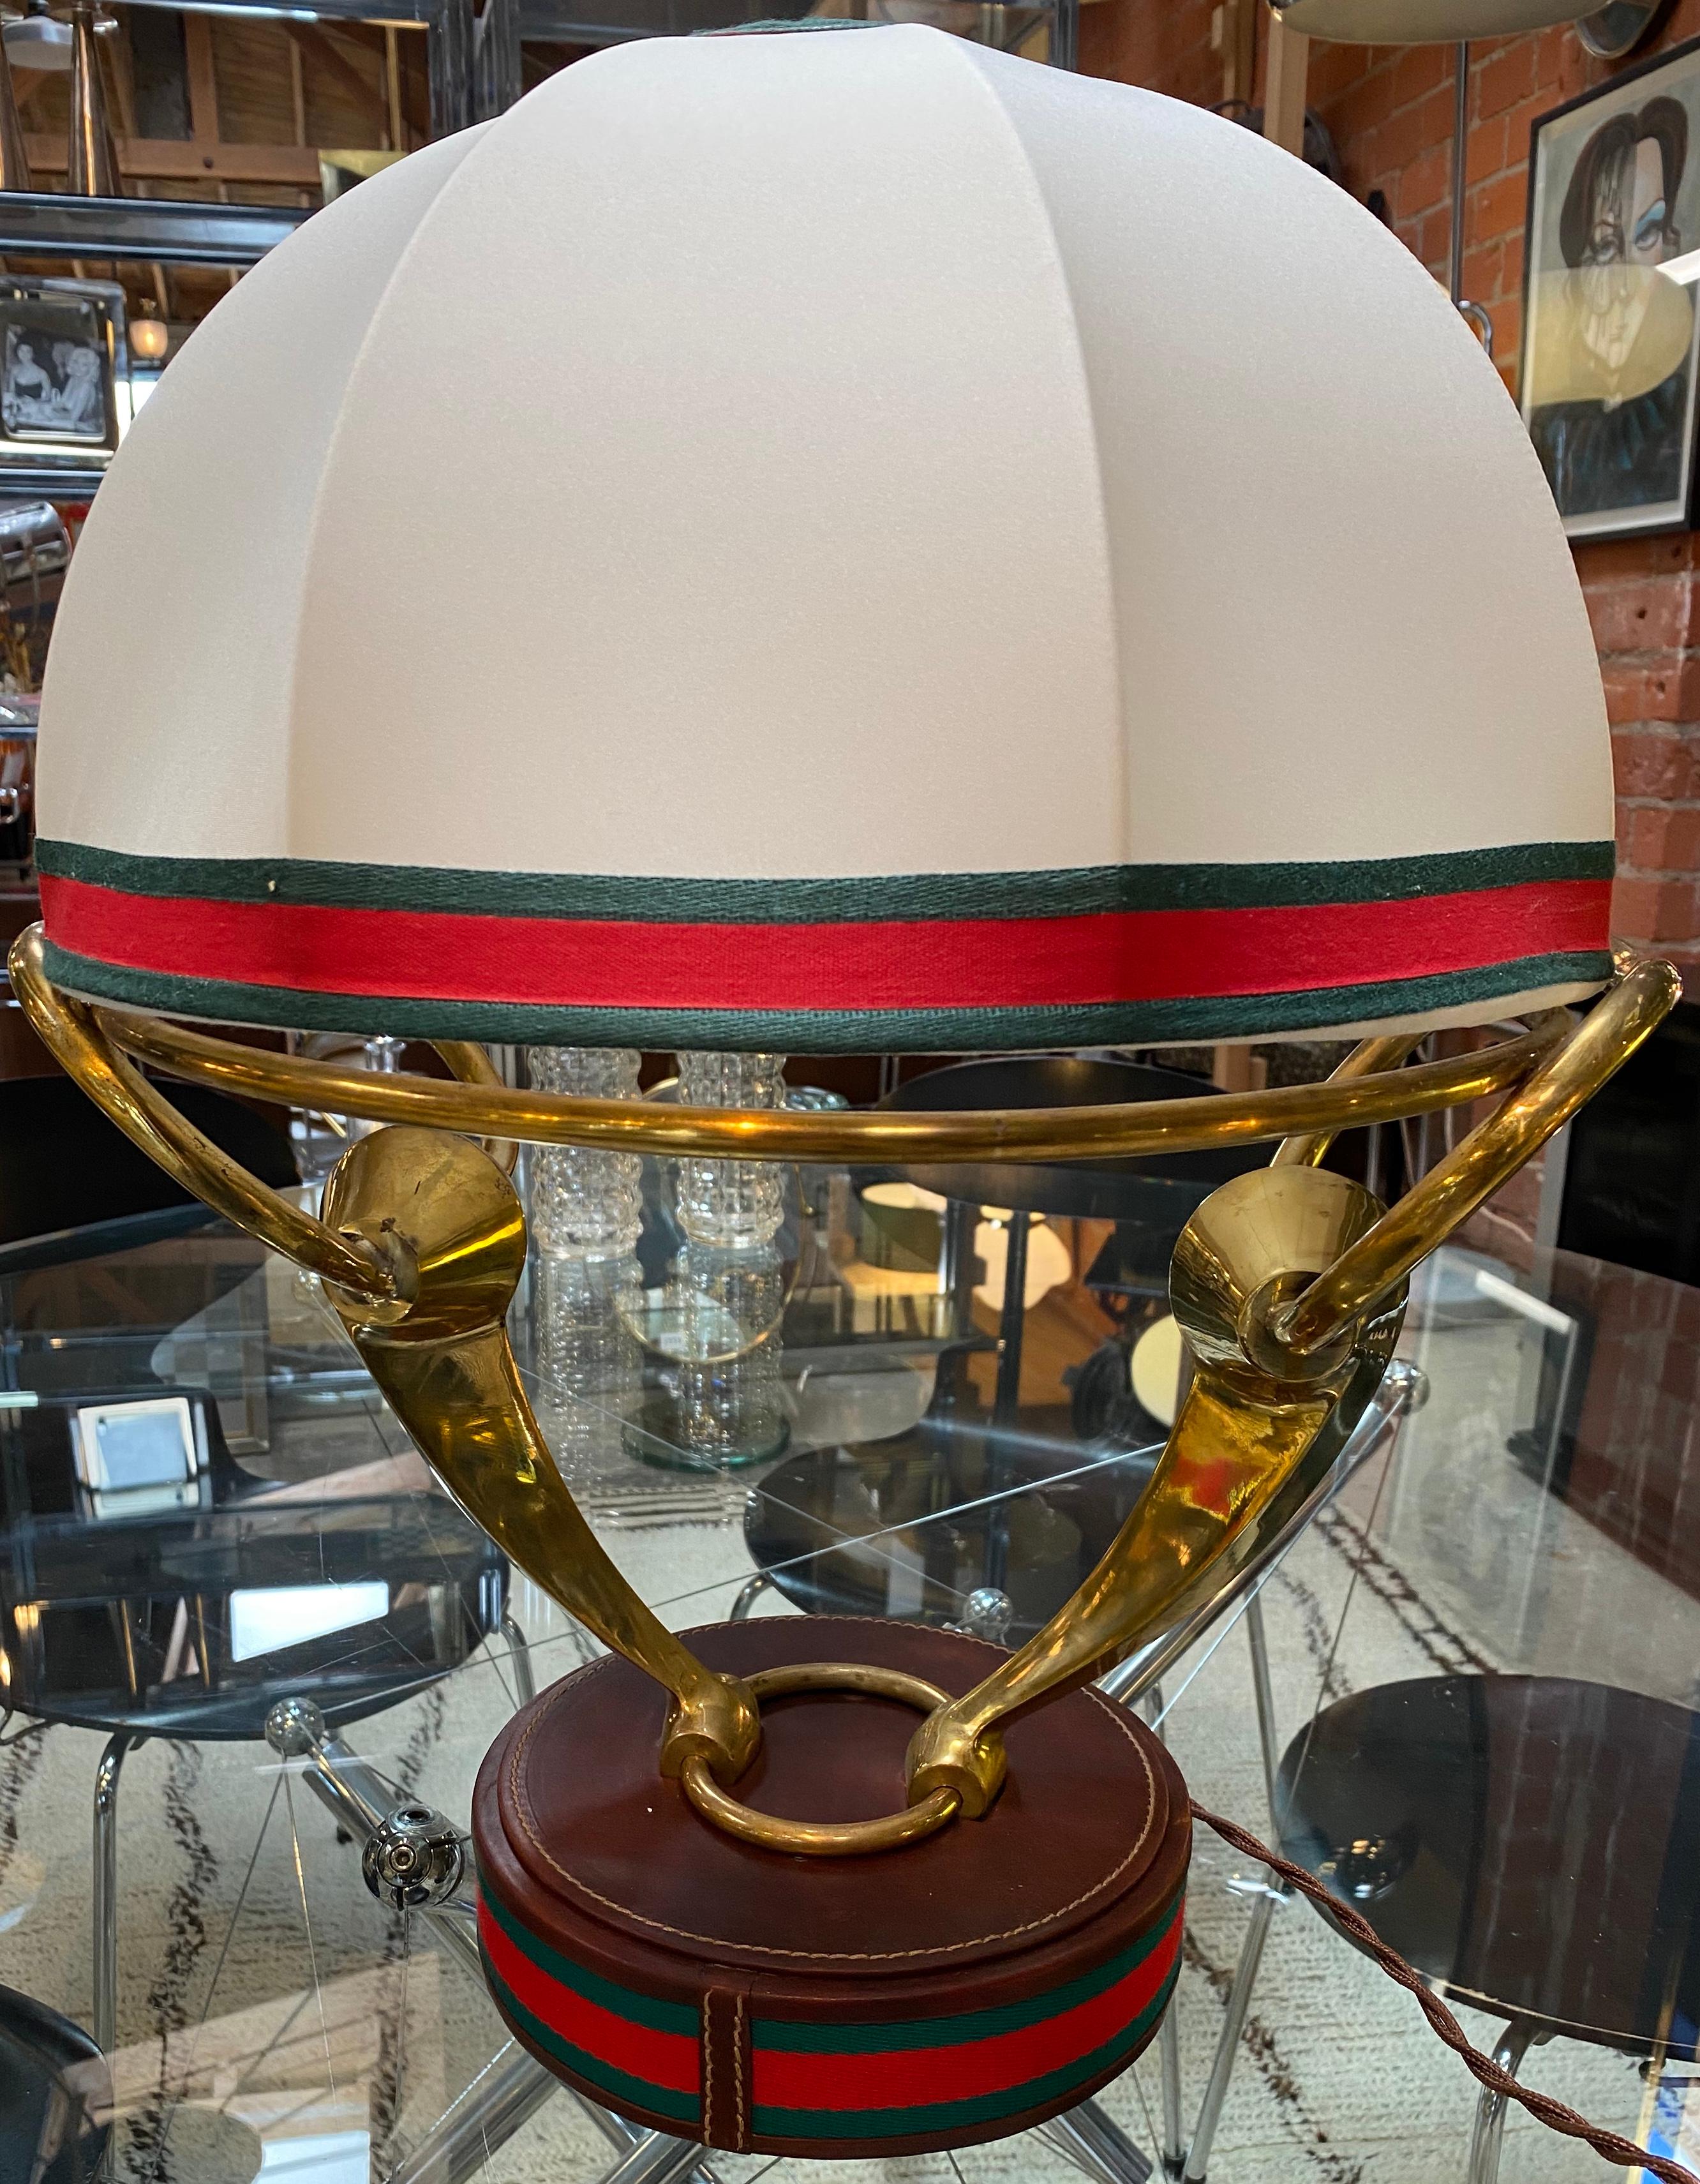 Super rare Italian Gucci table lamp, made in Italy in 1970s circa. The lamp is made by leather base and brass arms with an amazing shape. An iconic piece that will complete a mid-century style living room or studio with its timeless elegance.